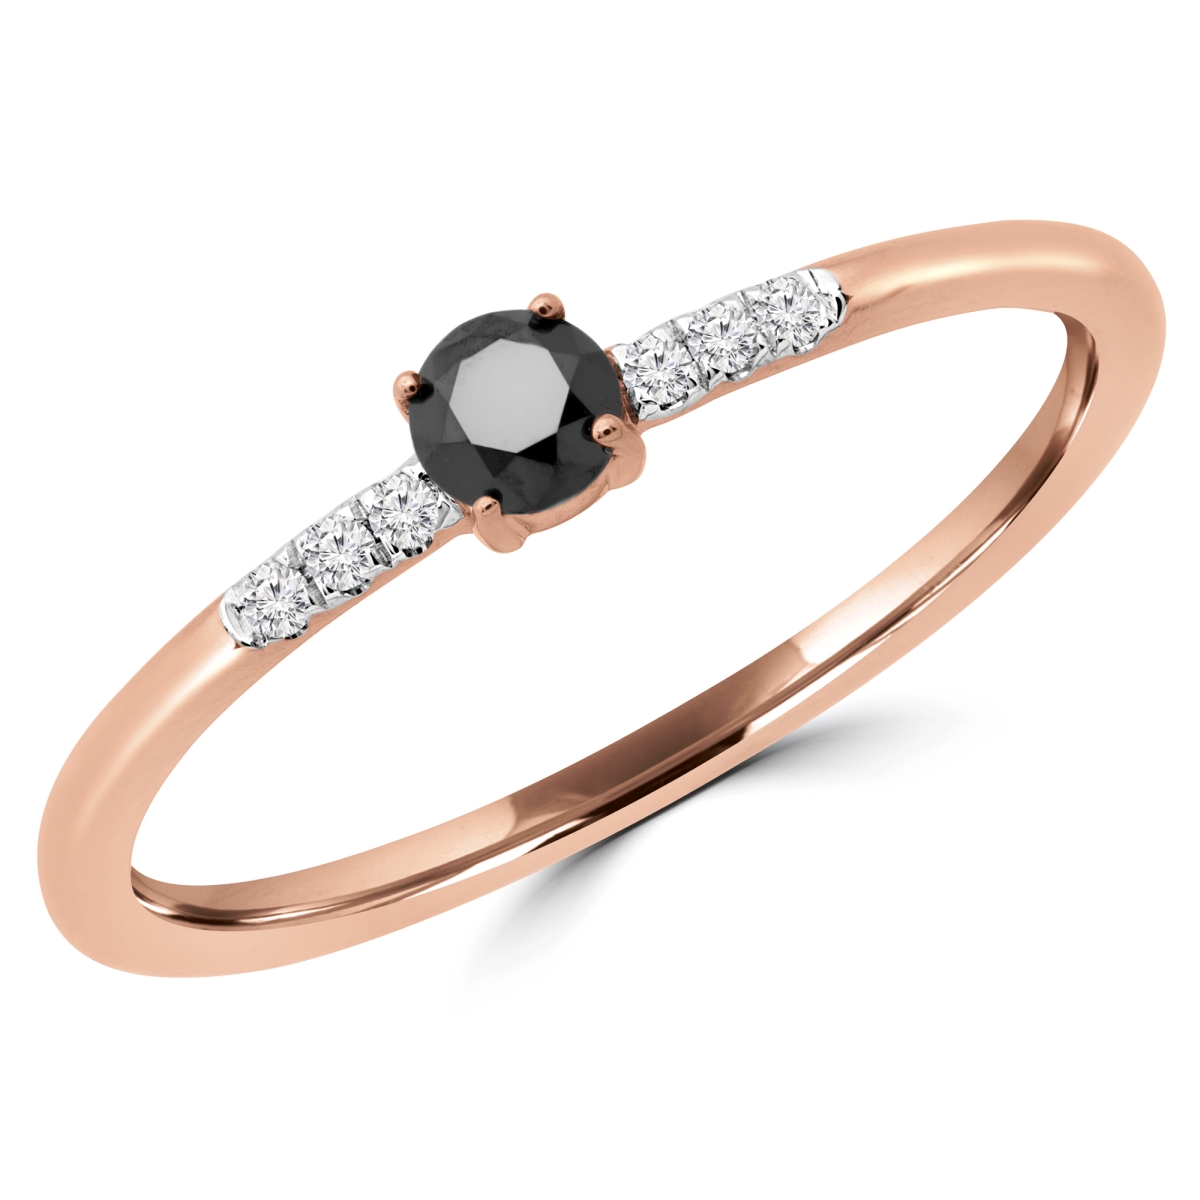 Picture of Majesty Diamonds MDR190079-5.5 0.16 CTW Round Black Diamond Bezel Set Cocktail Ring in 14K Rose Gold - Size 5.5